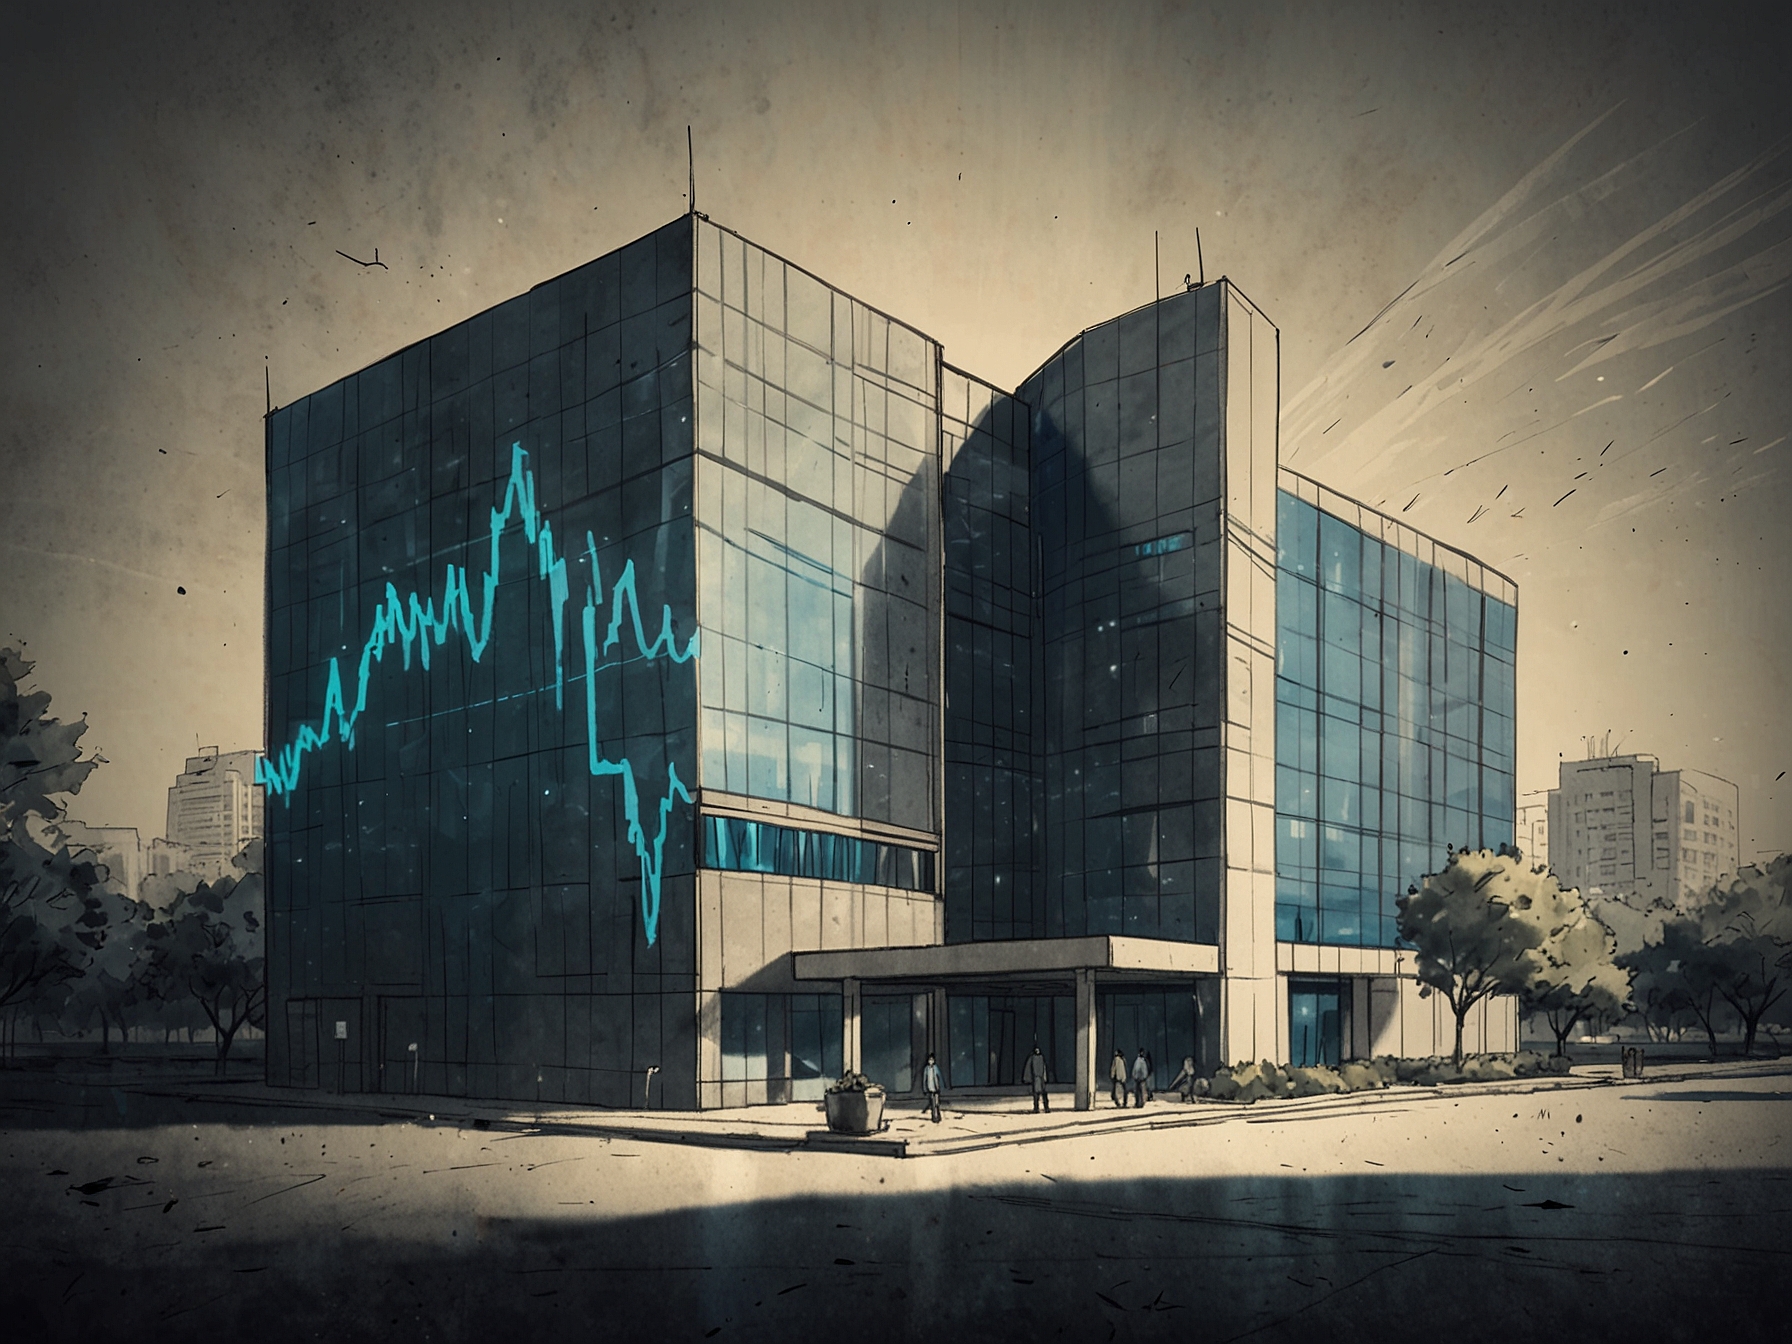 An illustration of InMobi's headquarters with a stock market graph overlay, symbolizing the company's renewed IPO ambitions on the Indian stock exchanges.